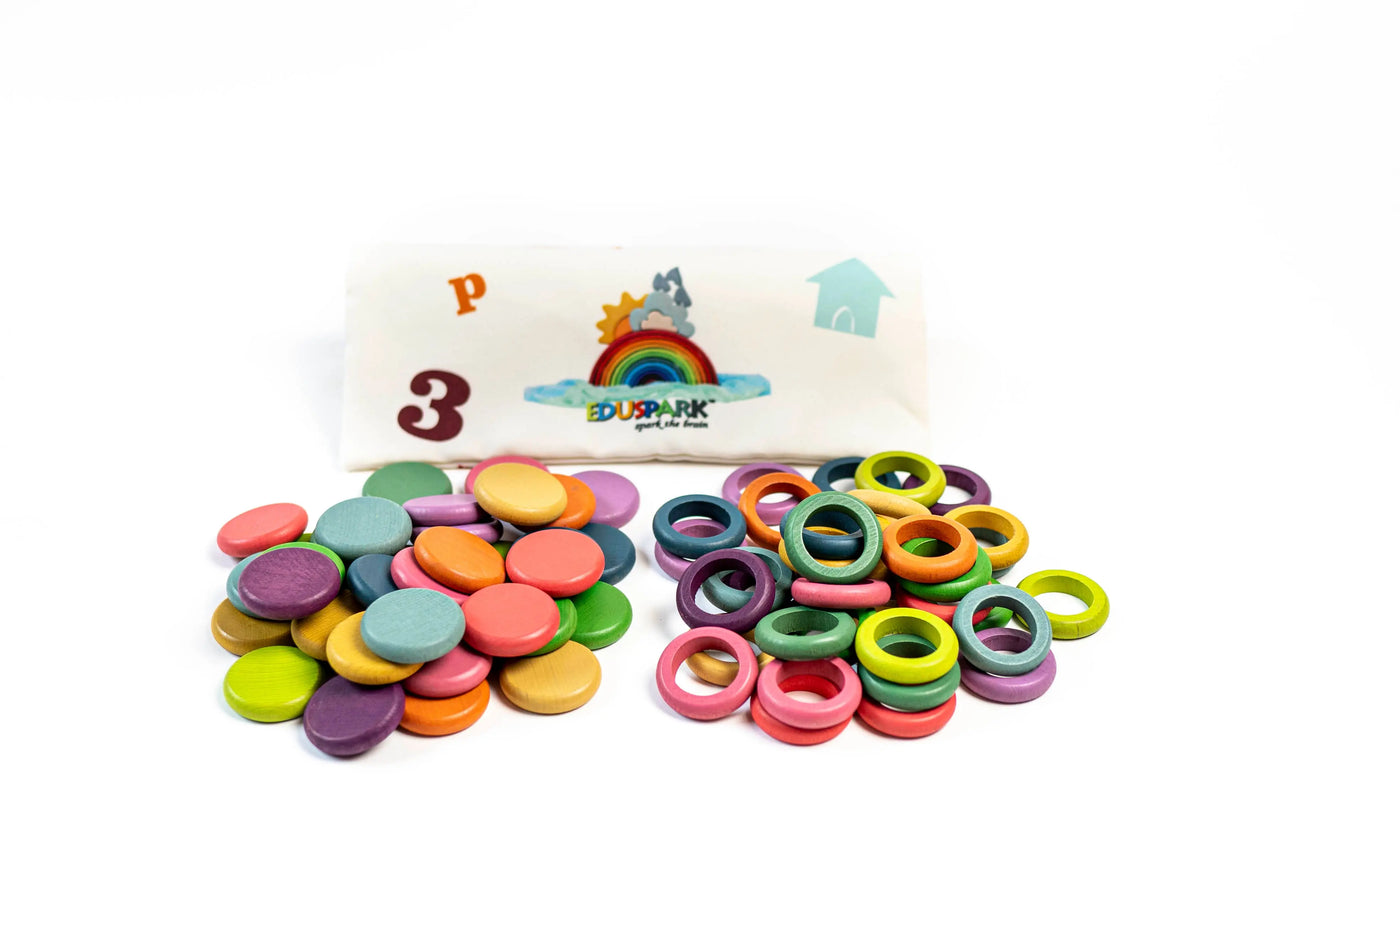 Open-Ended Play wooden Rings and Coins Eduspark Toys